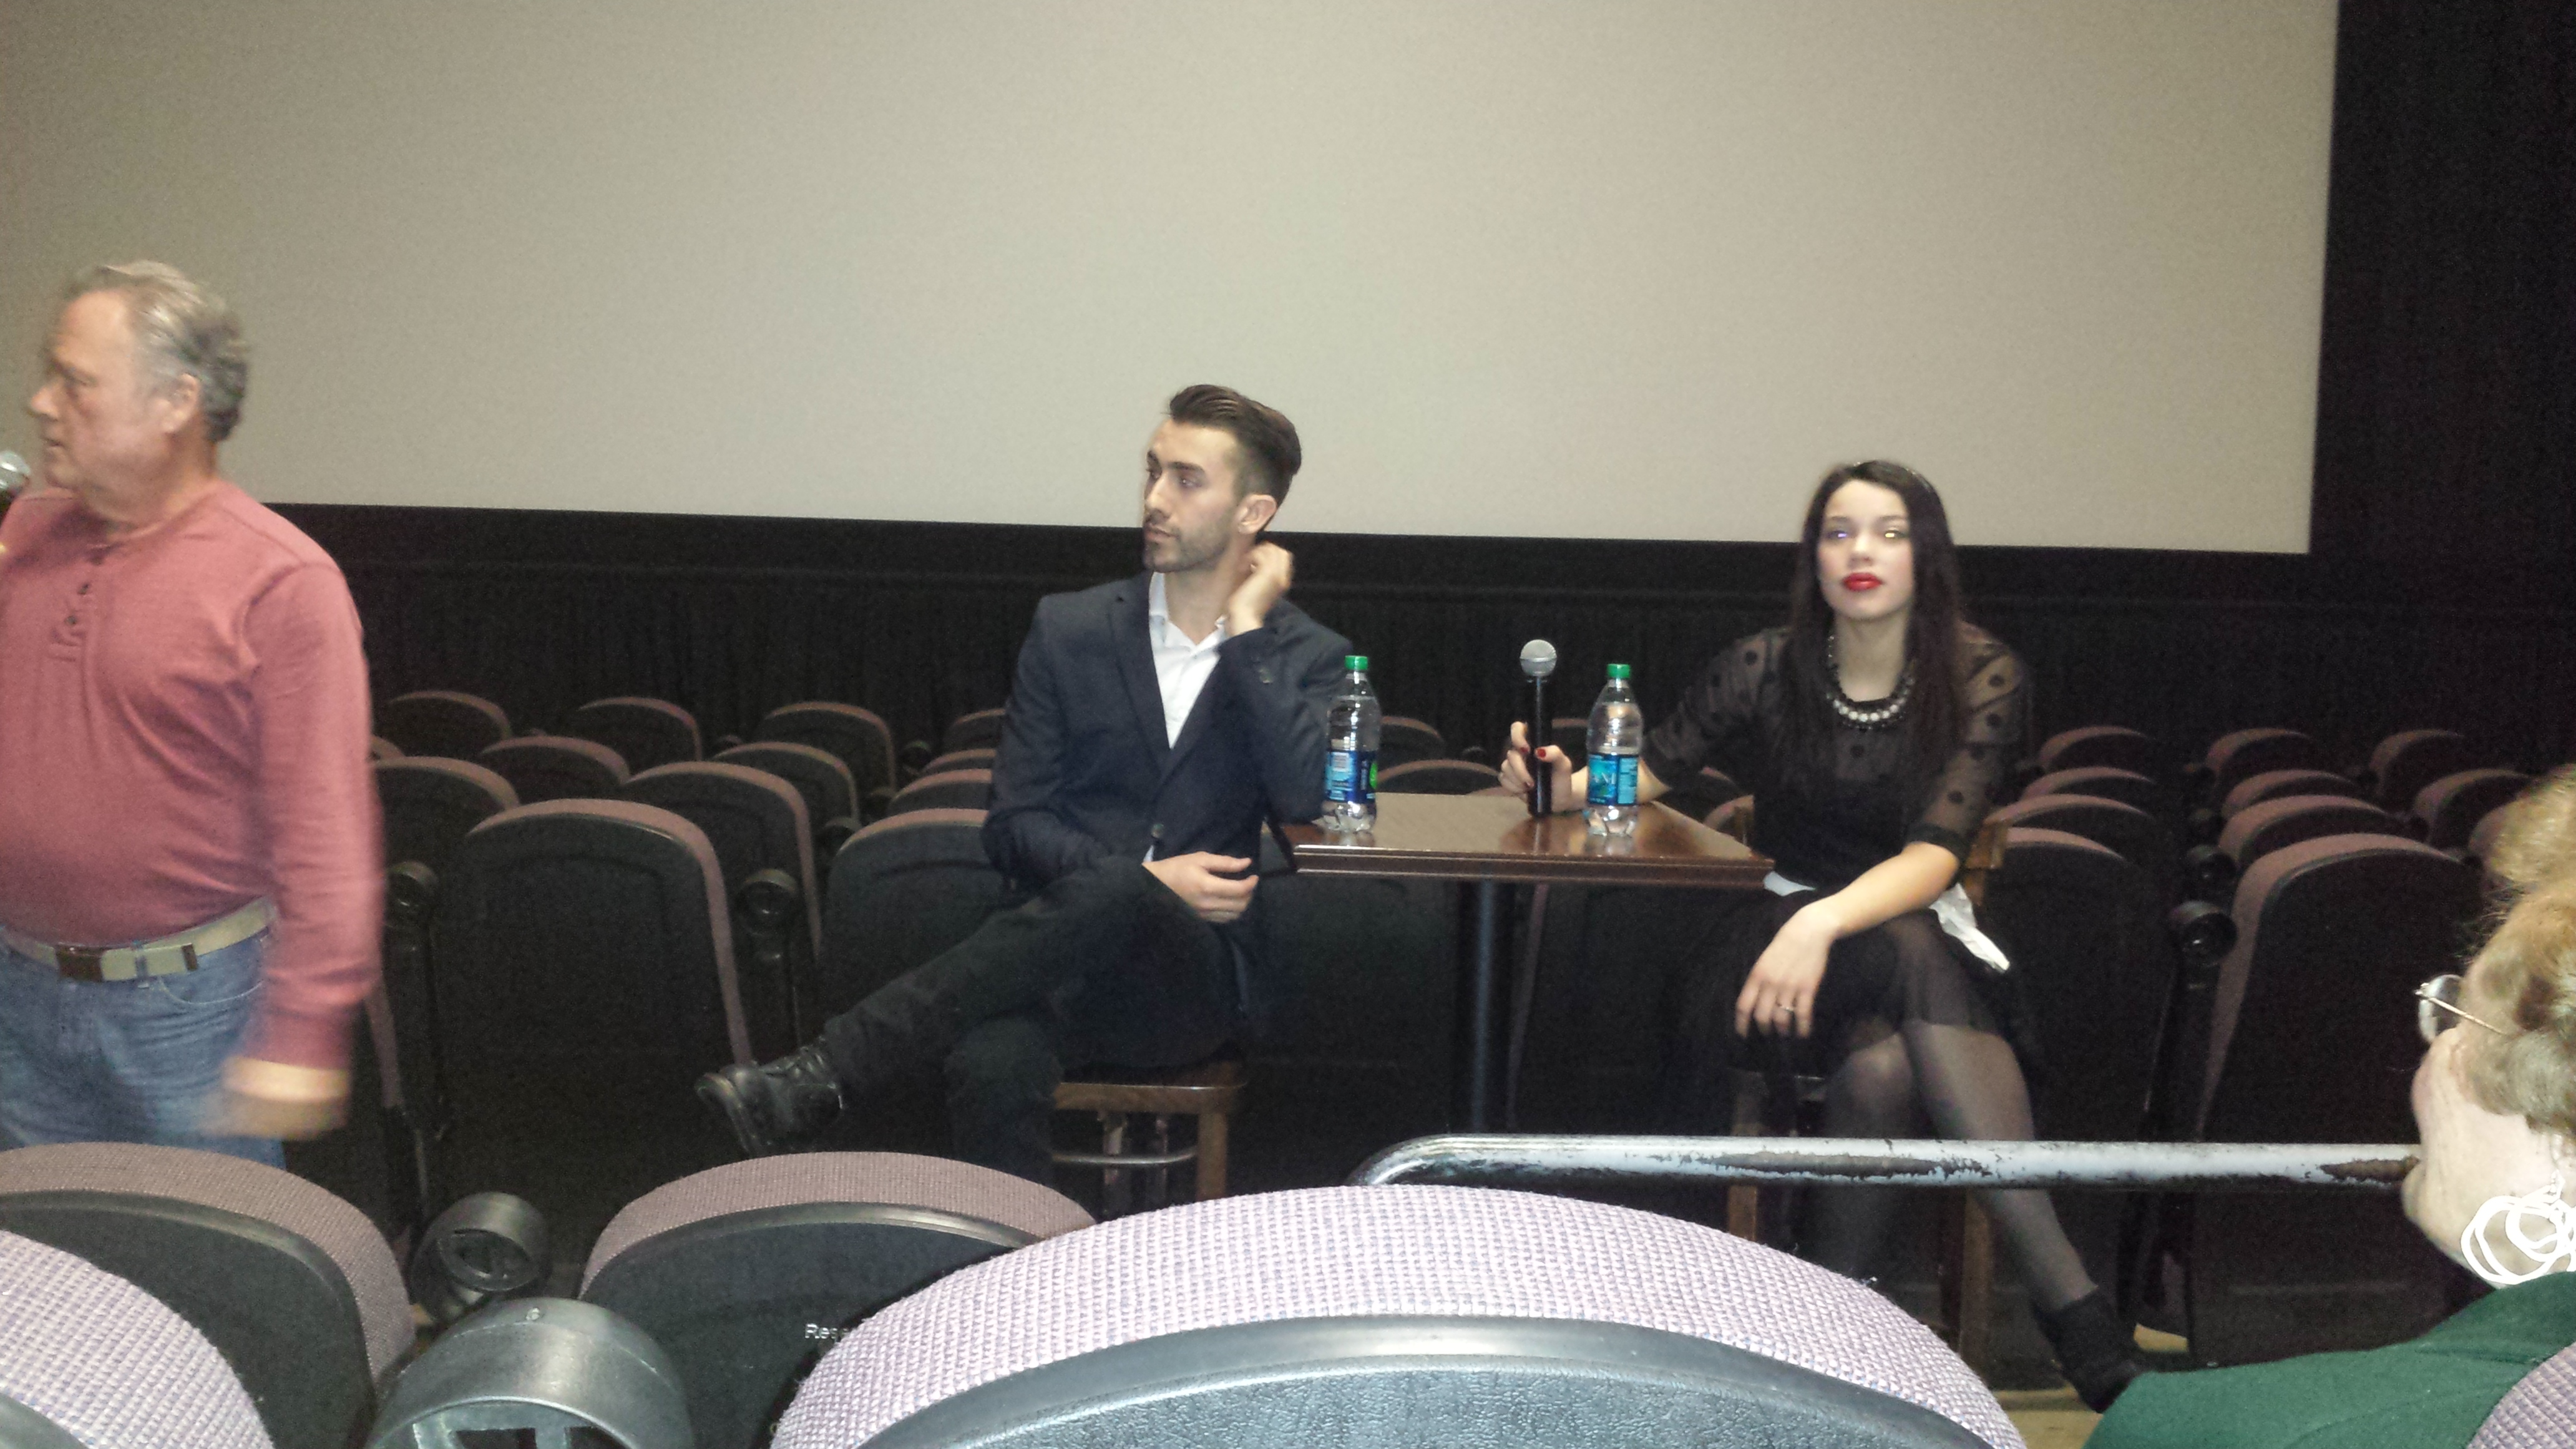 At Middleton Q&A with cast members Kenny Parks Jr and Victoria James